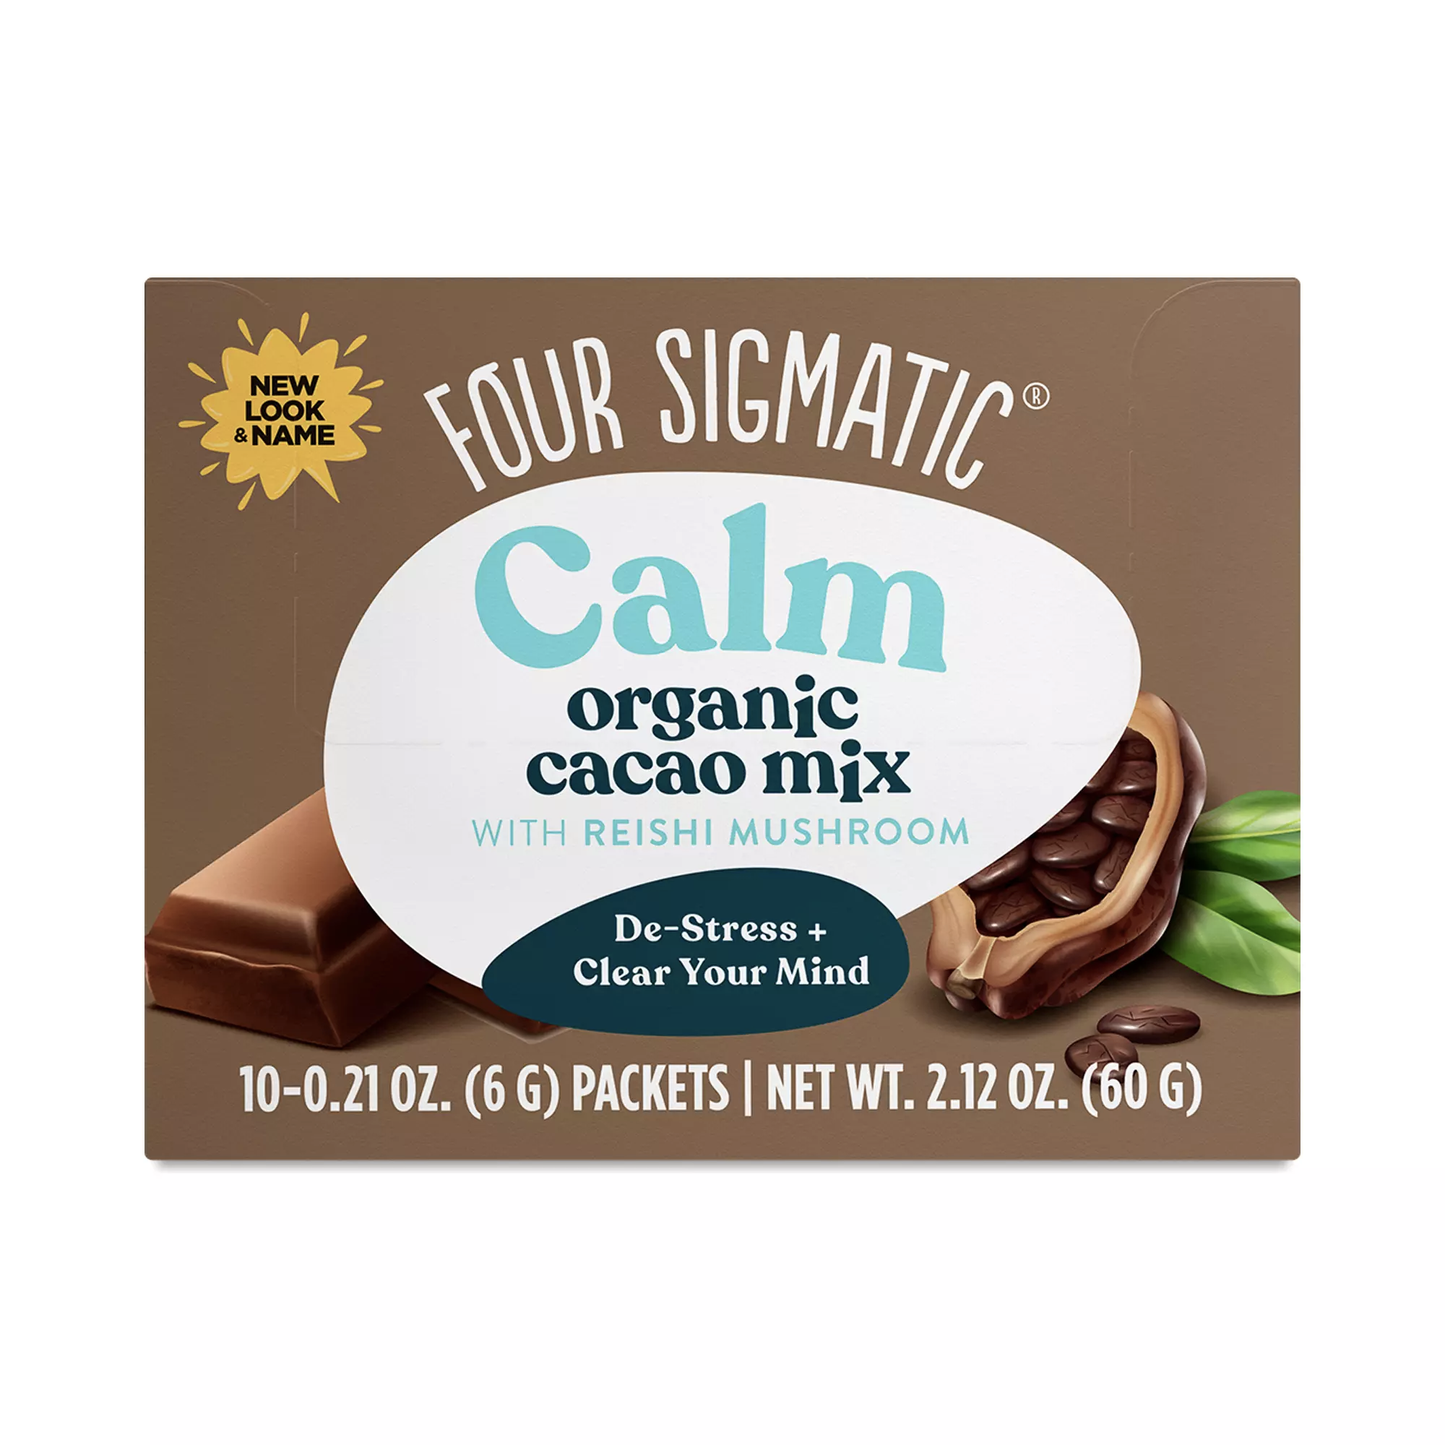 FREE Four Sigmatic Calm Cacao Mix (2 packets)